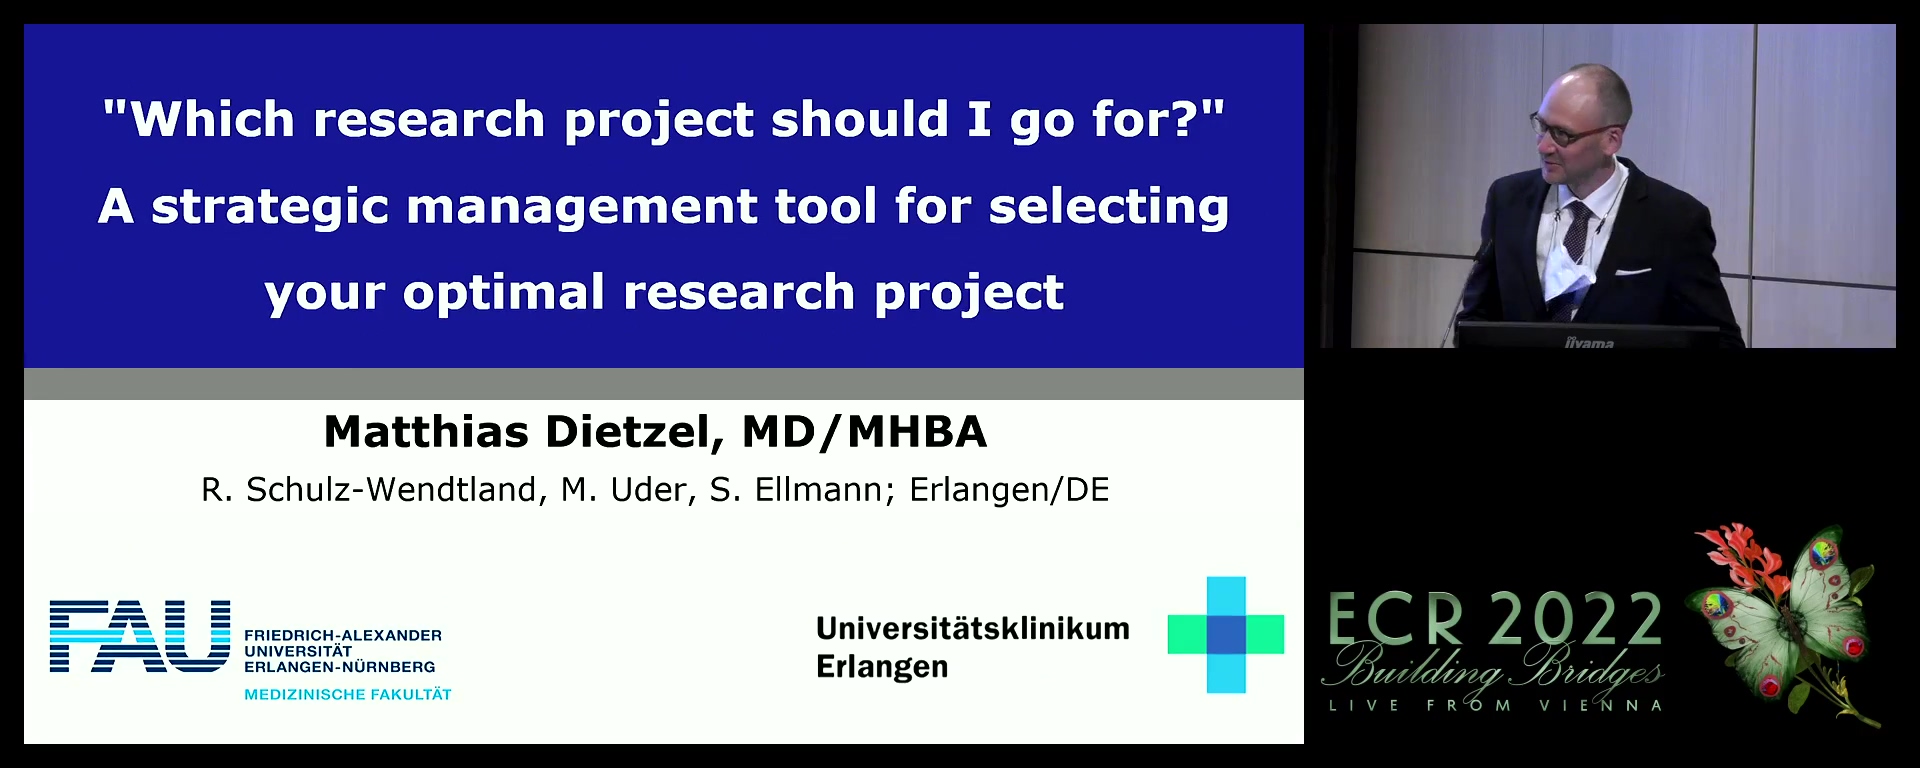 "Which research project should I go for?" A strategic management tool for selecting your optimal research project